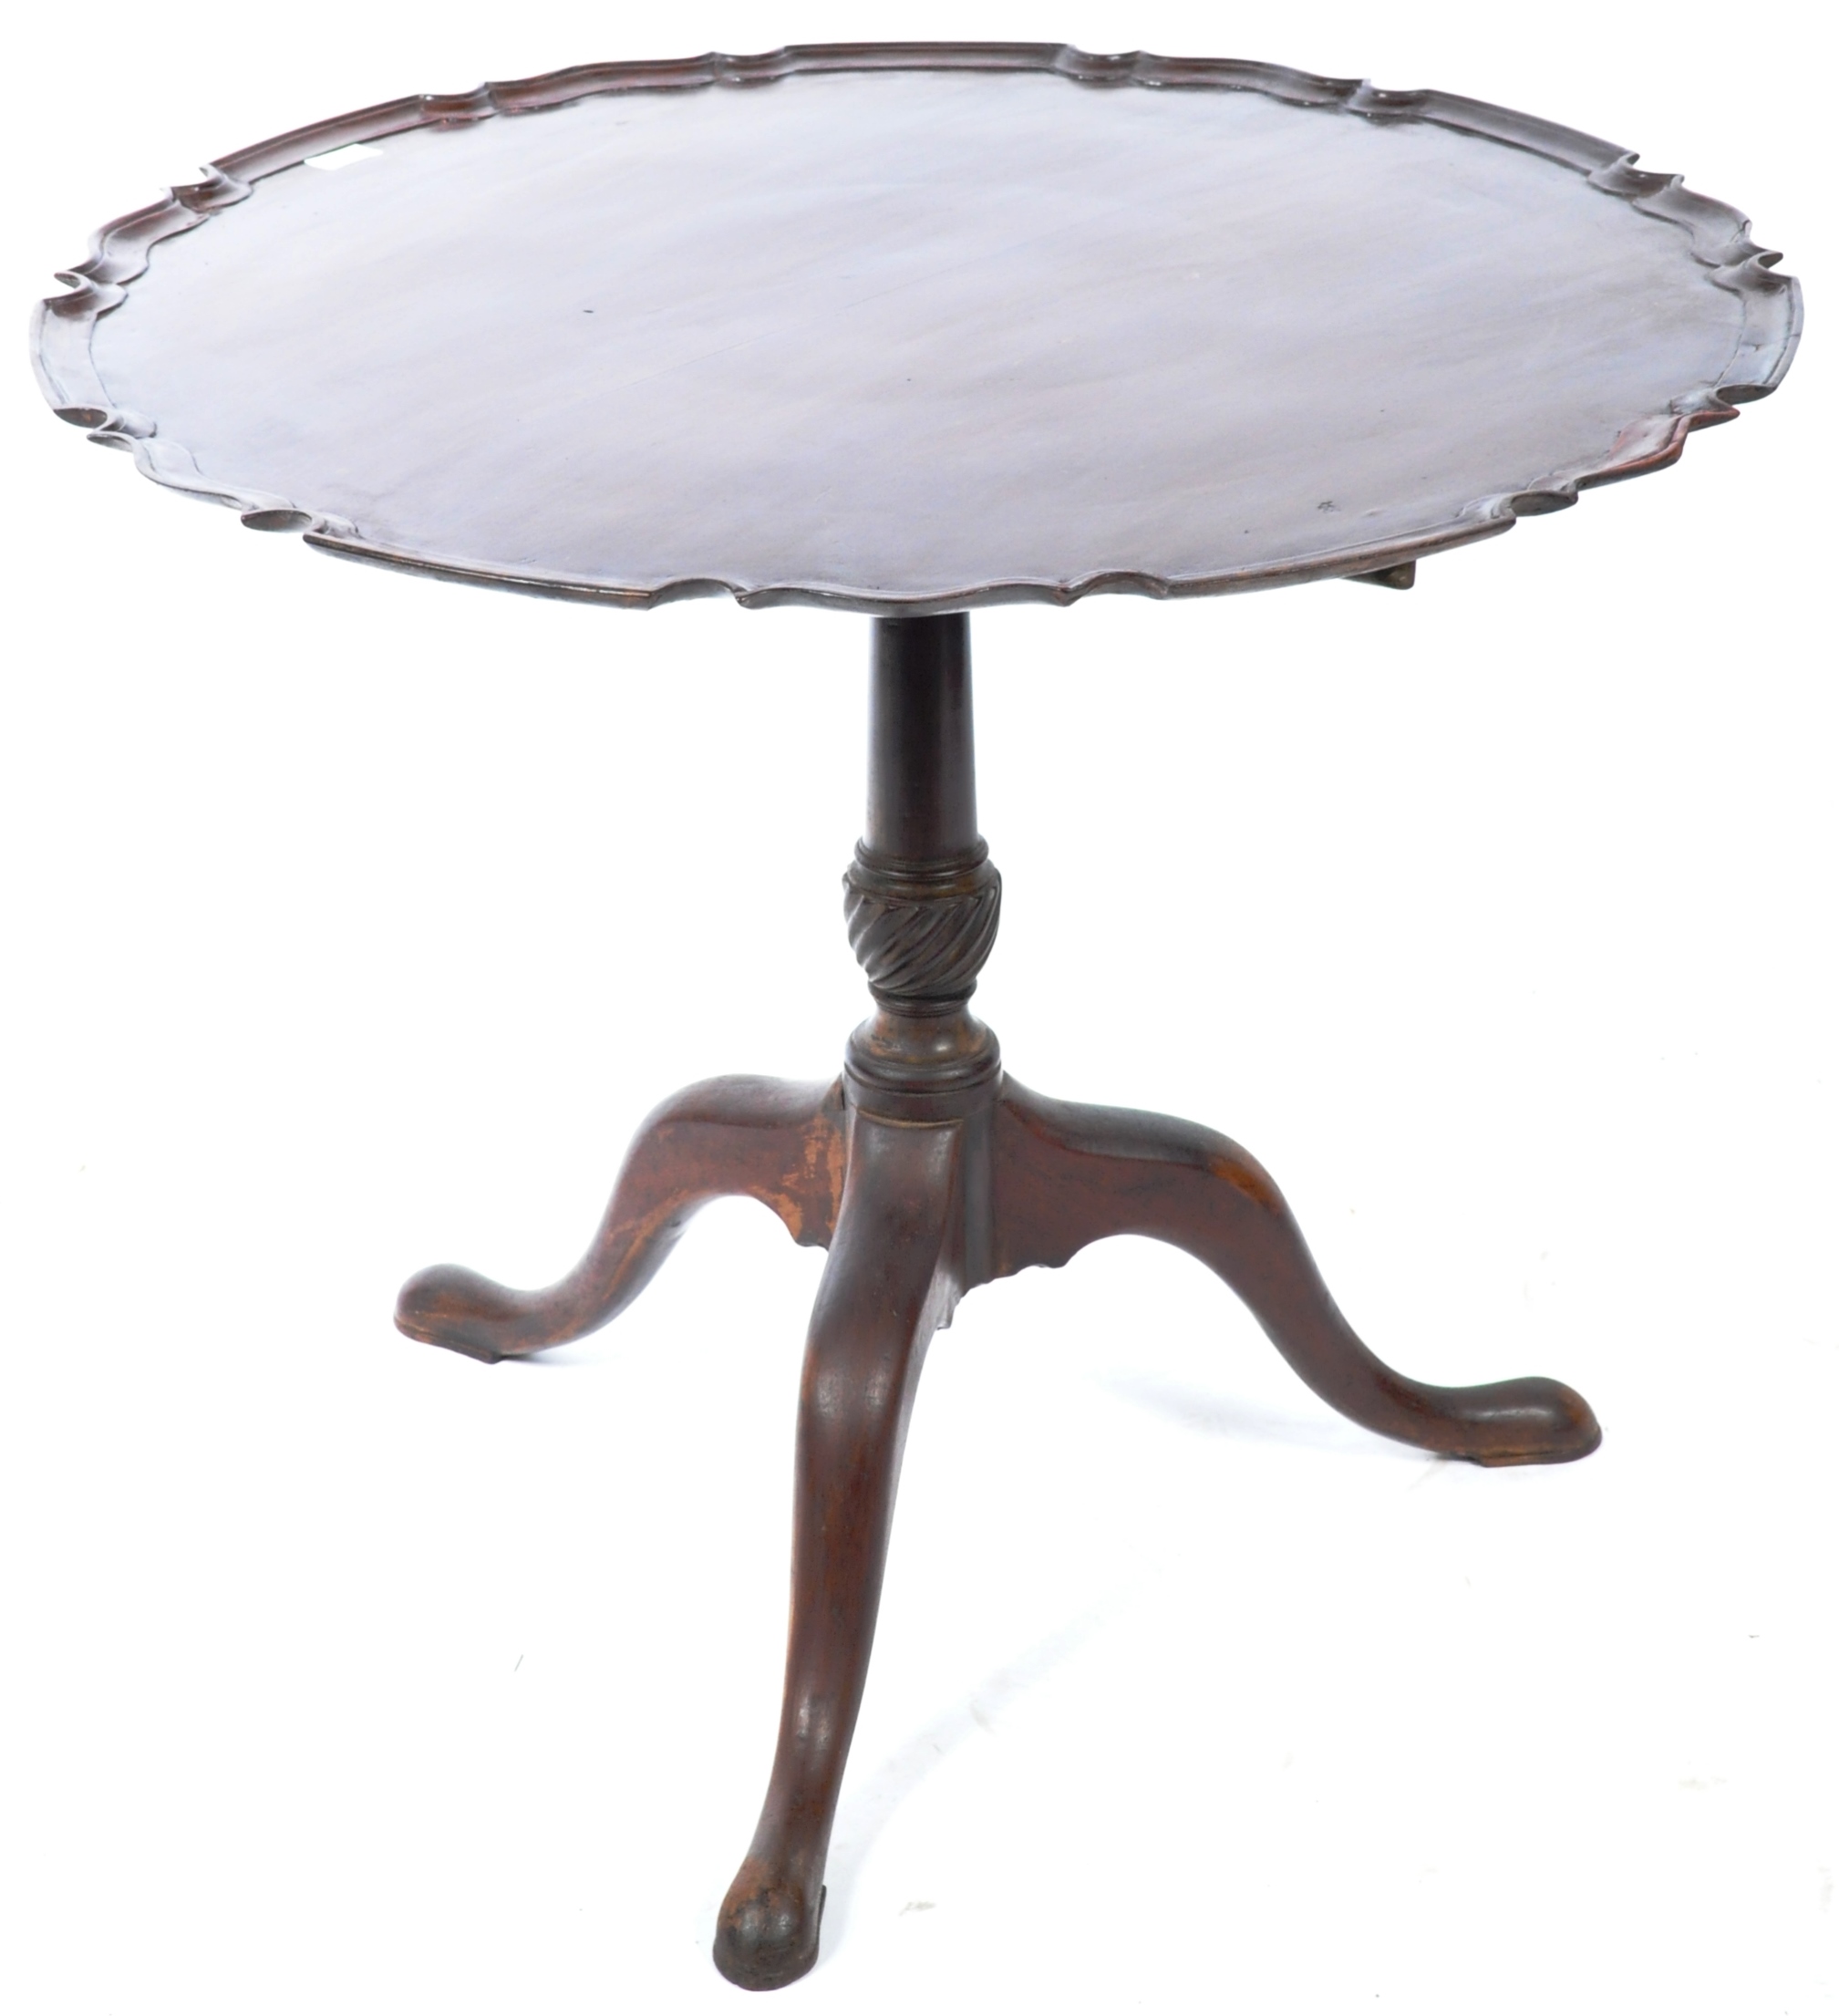 18TH / 19TH CENTURY MAHOAGNY PIE CRUST WINE TABLE / OCCASIONAL TABLE - Image 2 of 6